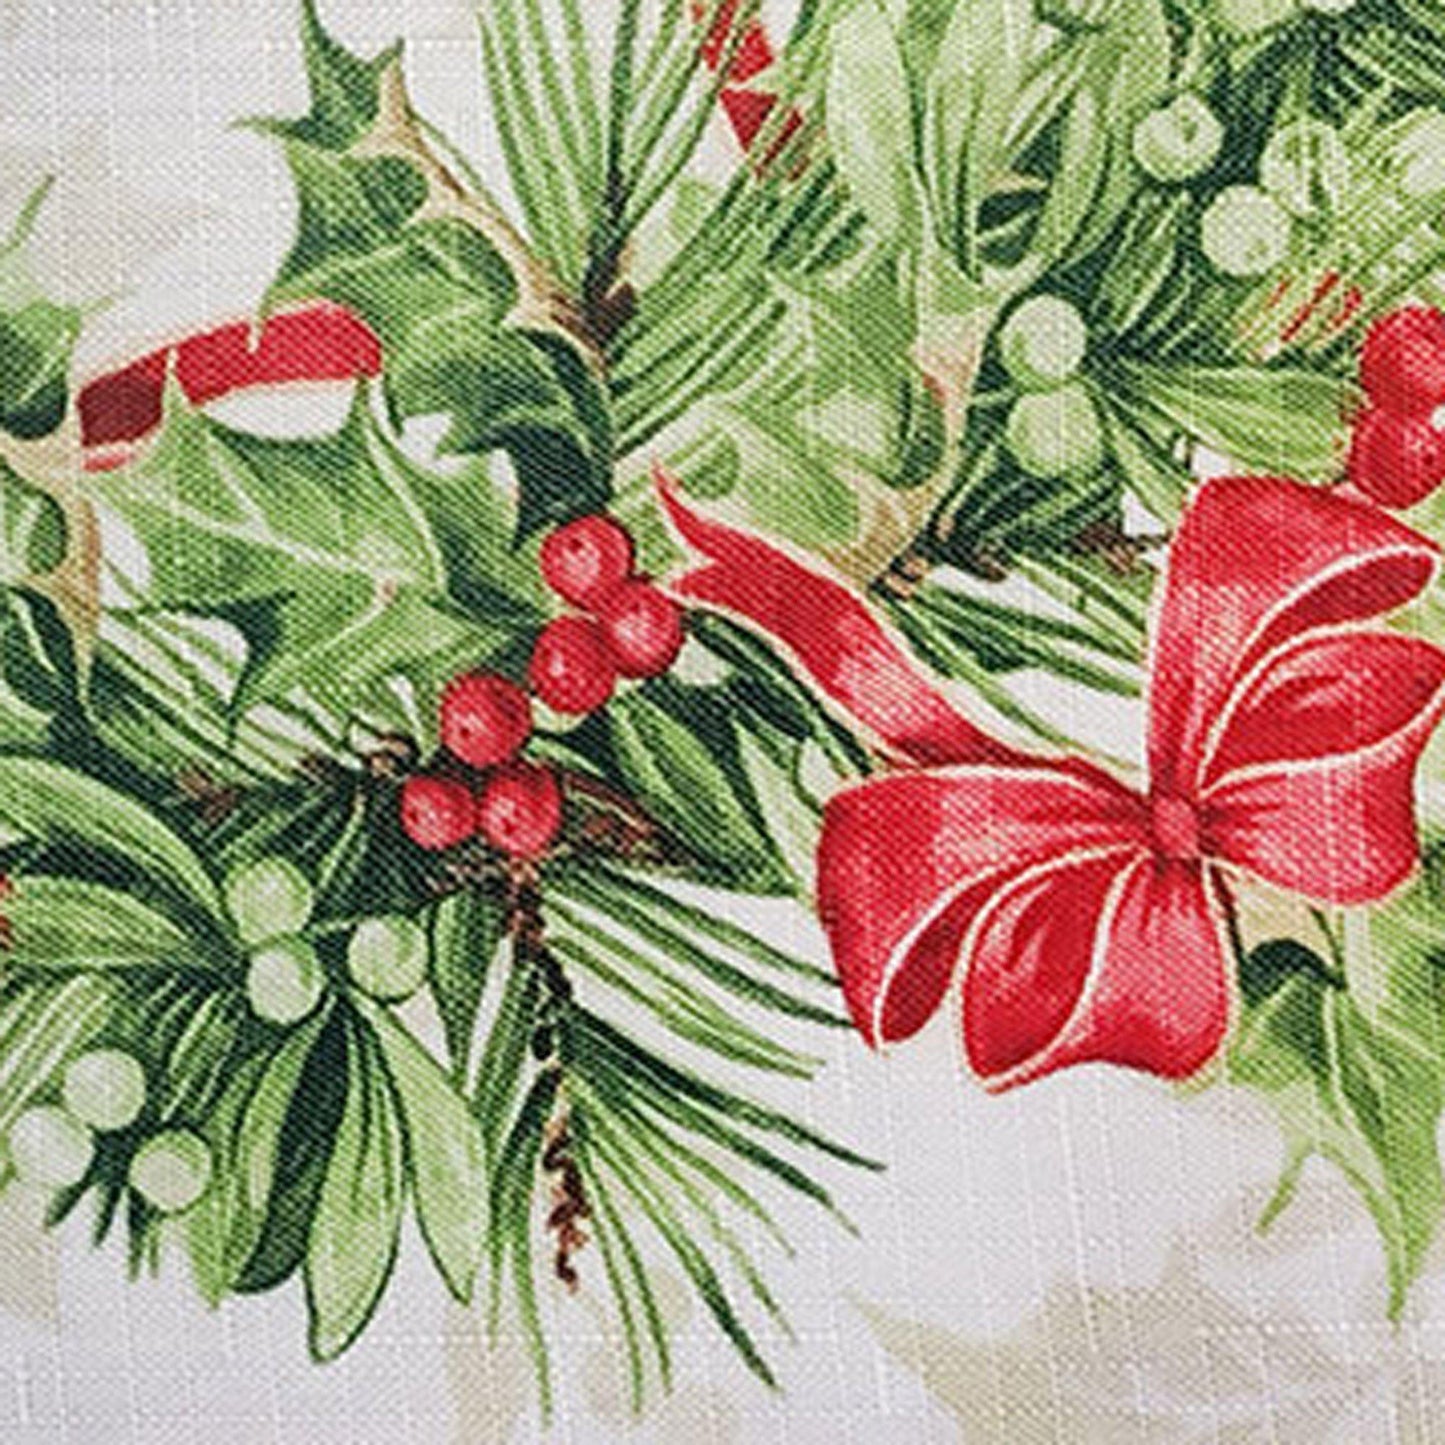 Holly Traditions Holiday Tablecloth